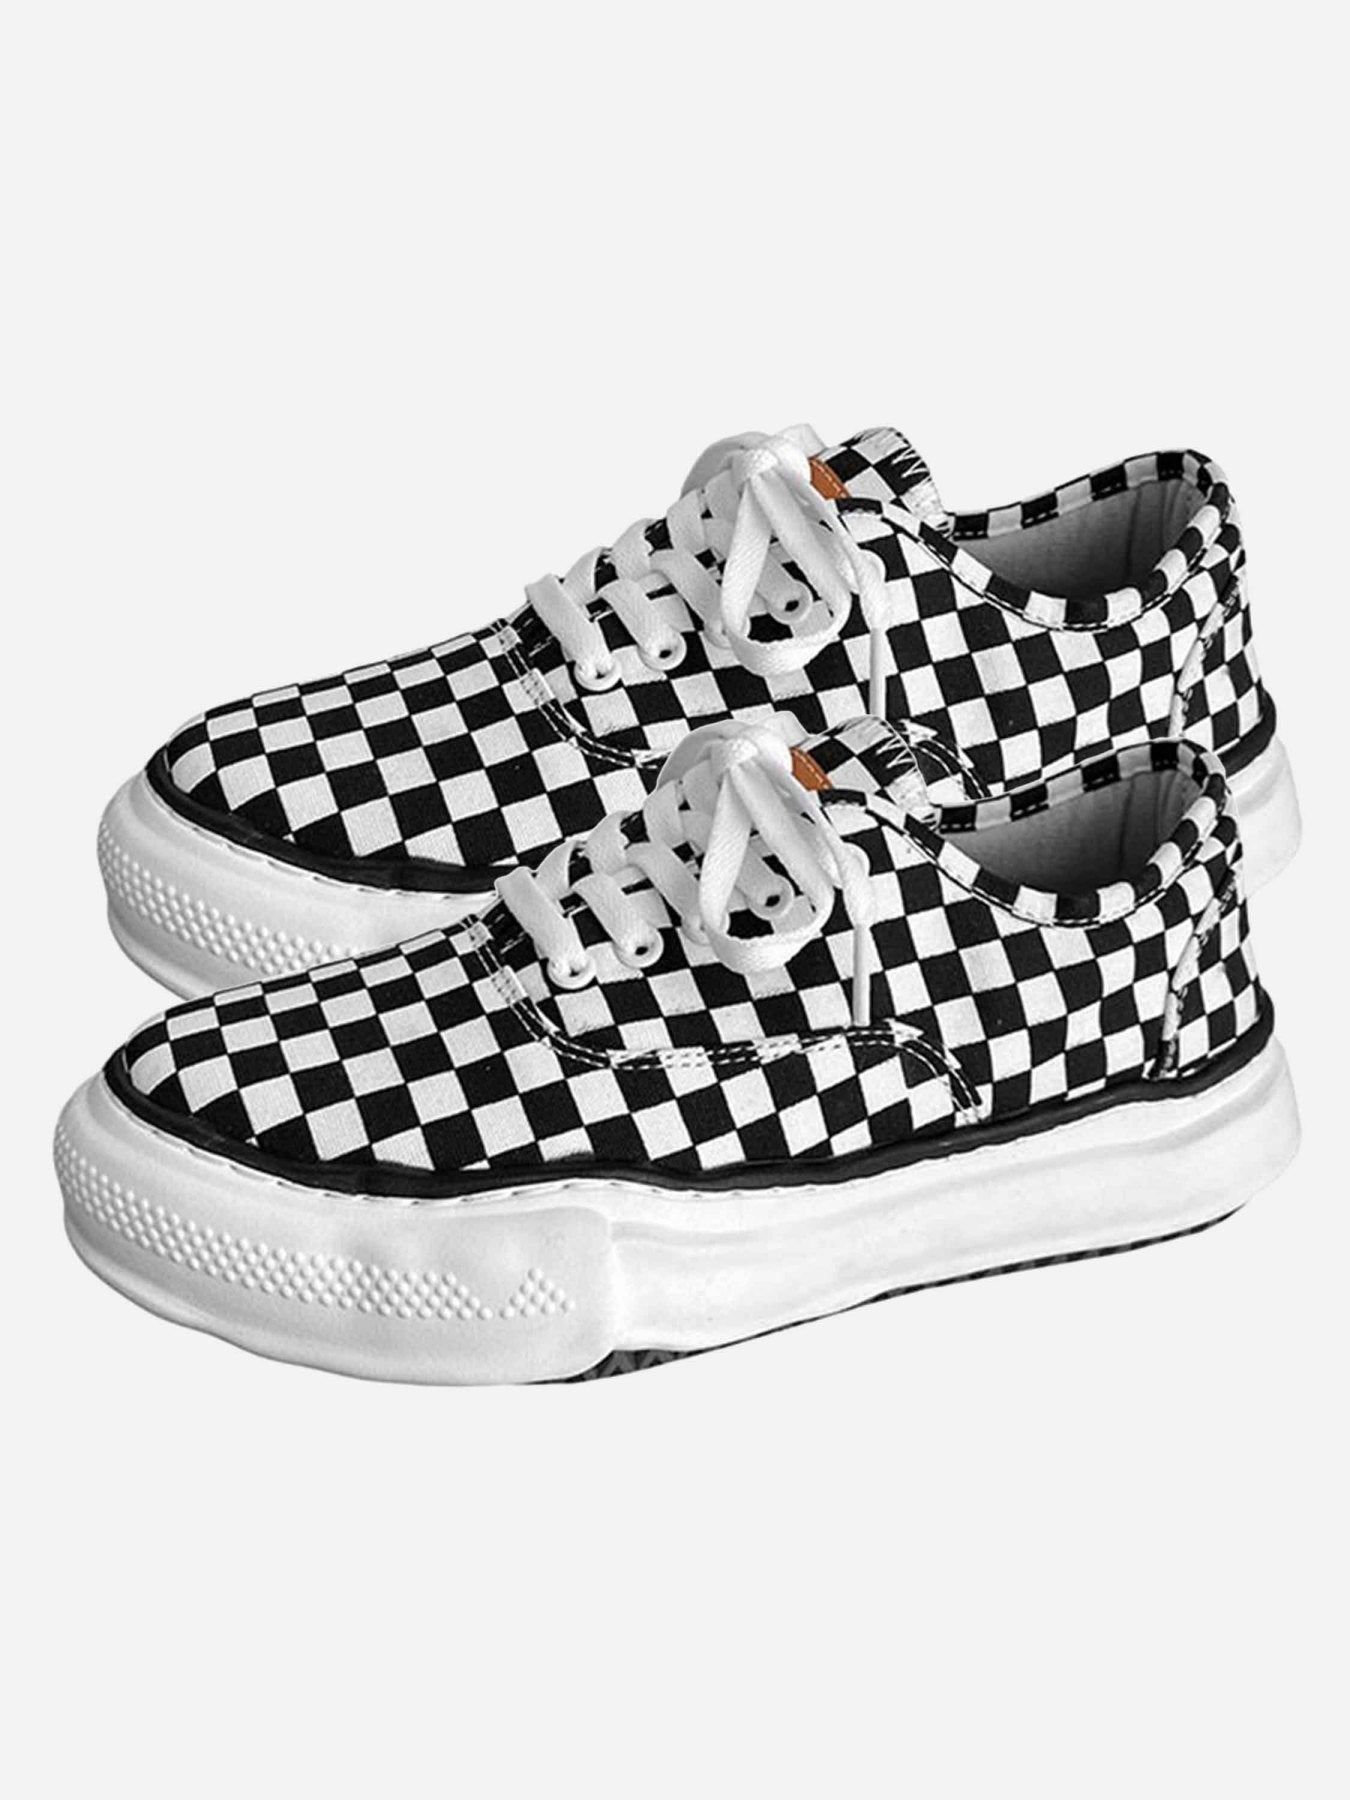 Thesupermade High Street Low-top Trendy Canvas Shoes